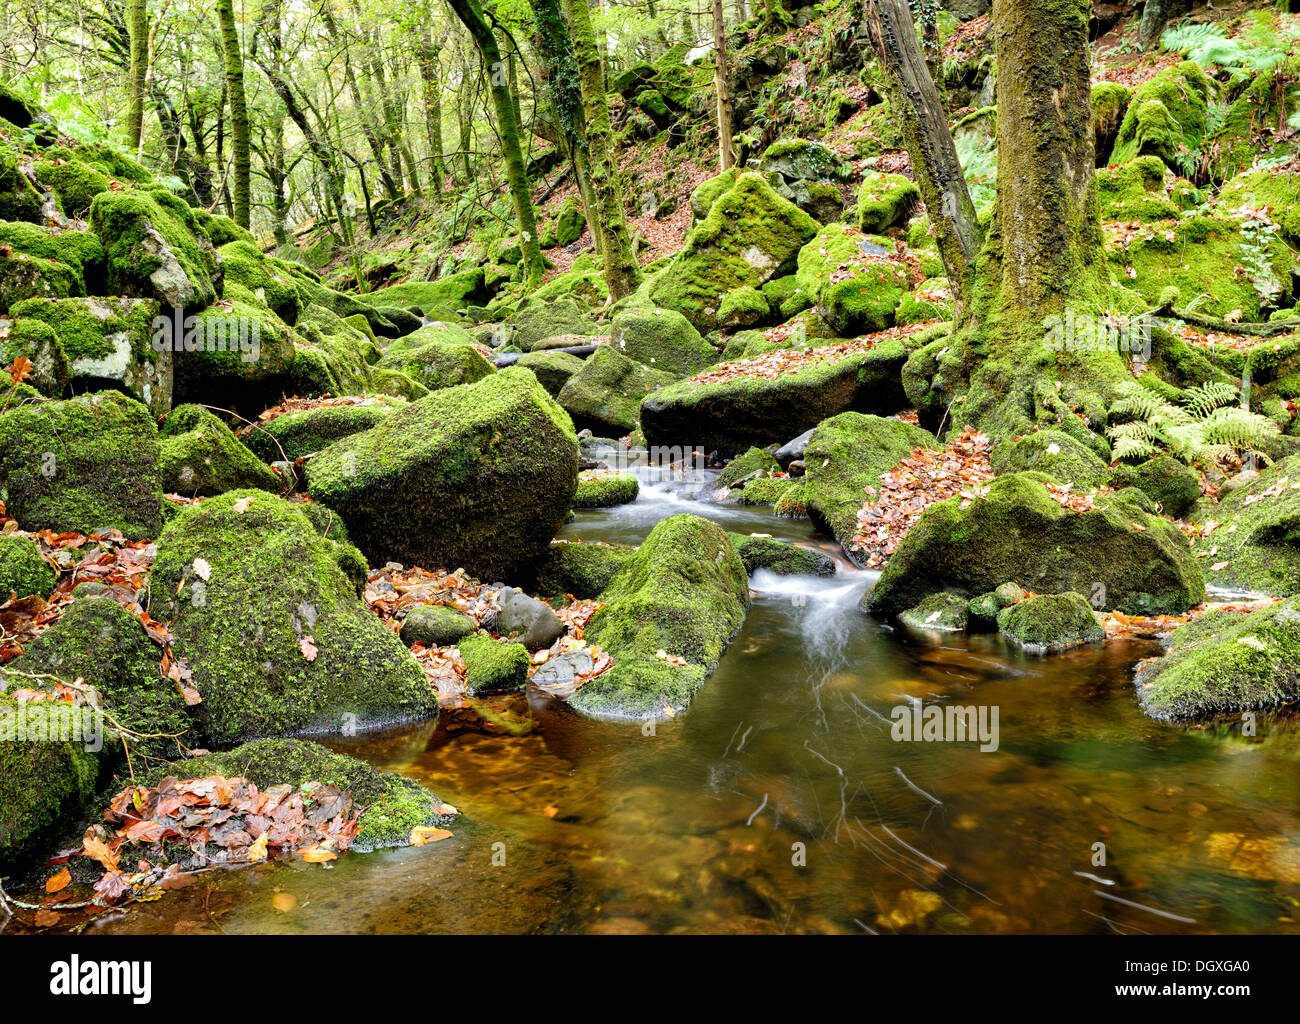 The River Meavy cascades over mossy rocks through Burrator Wood in Dartmoor National Park in Devon Stock Photo